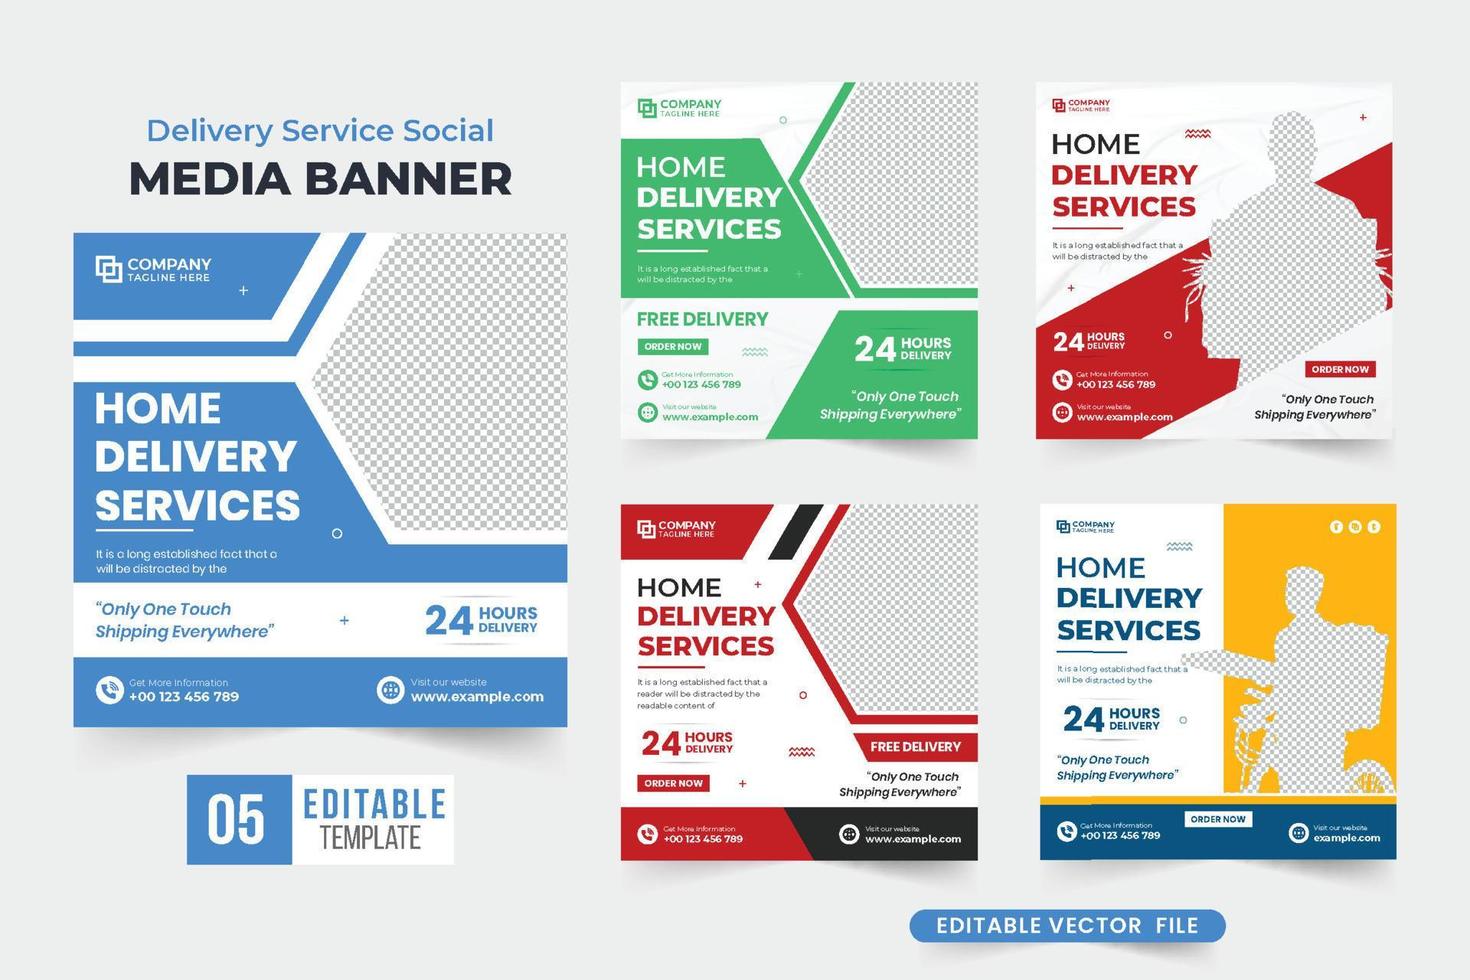 Creative delivery service promotional web banner collection vector with abstract shapes. Modern home delivery service template bundle for social media posts. Delivery business advertising template set